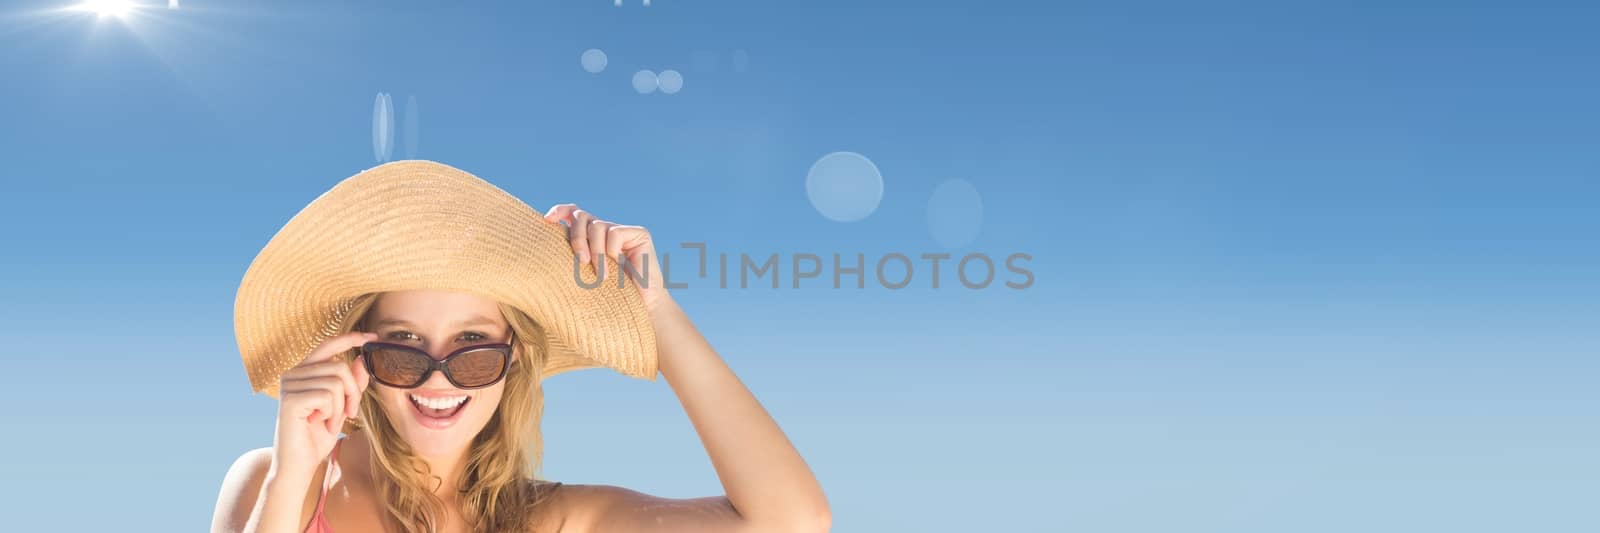 Digital composite of Millennial woman in sun hat and sunglasses against Summer sky with flare